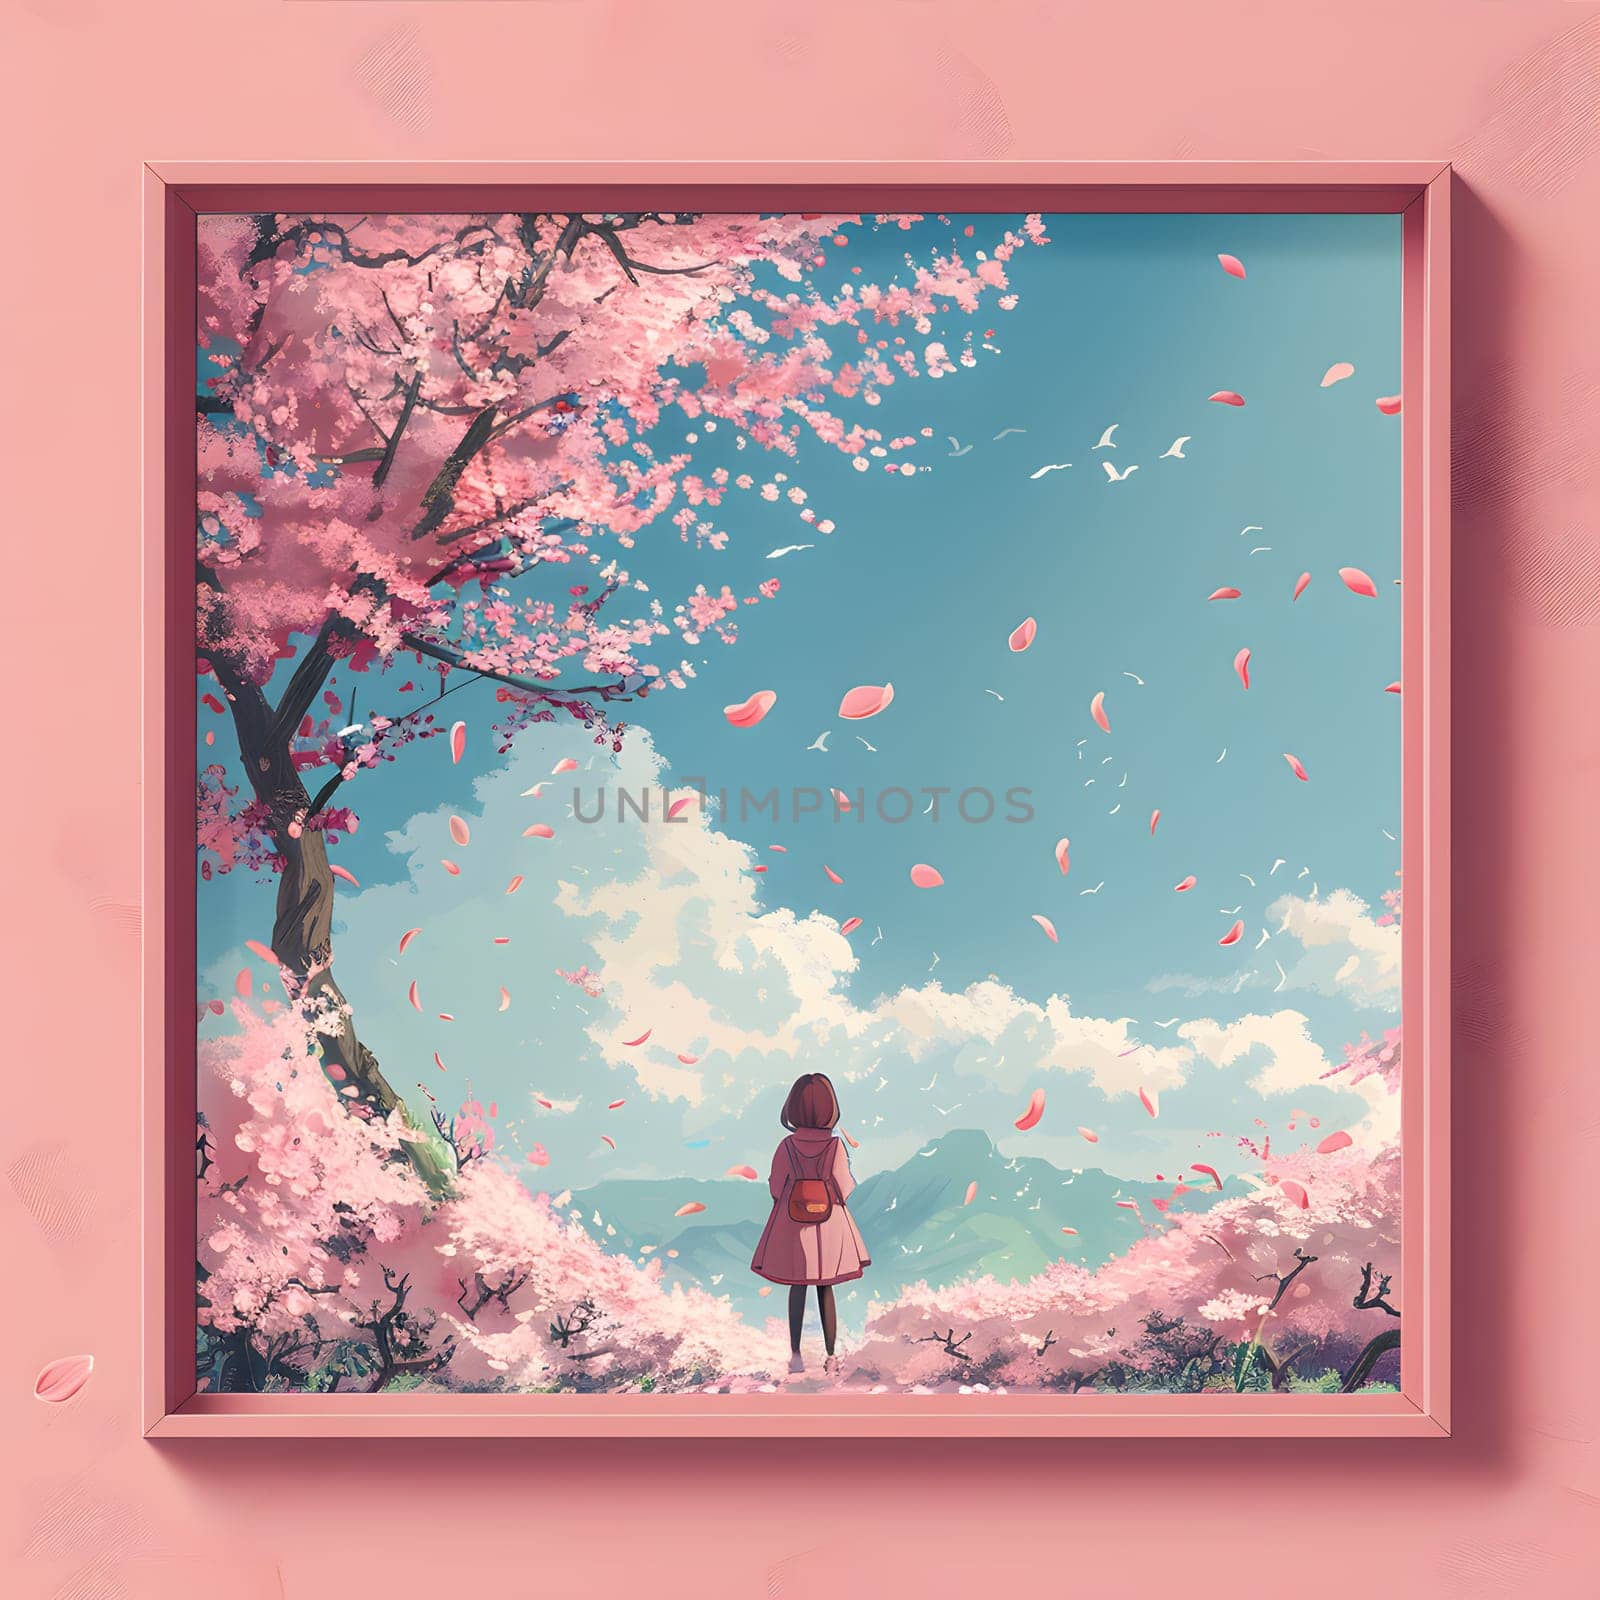 An art painting of a girl standing under a pink cherry blossom tree, framed in a rectangular picture frame. The sky and clouds in the background add to the beauty of the scene